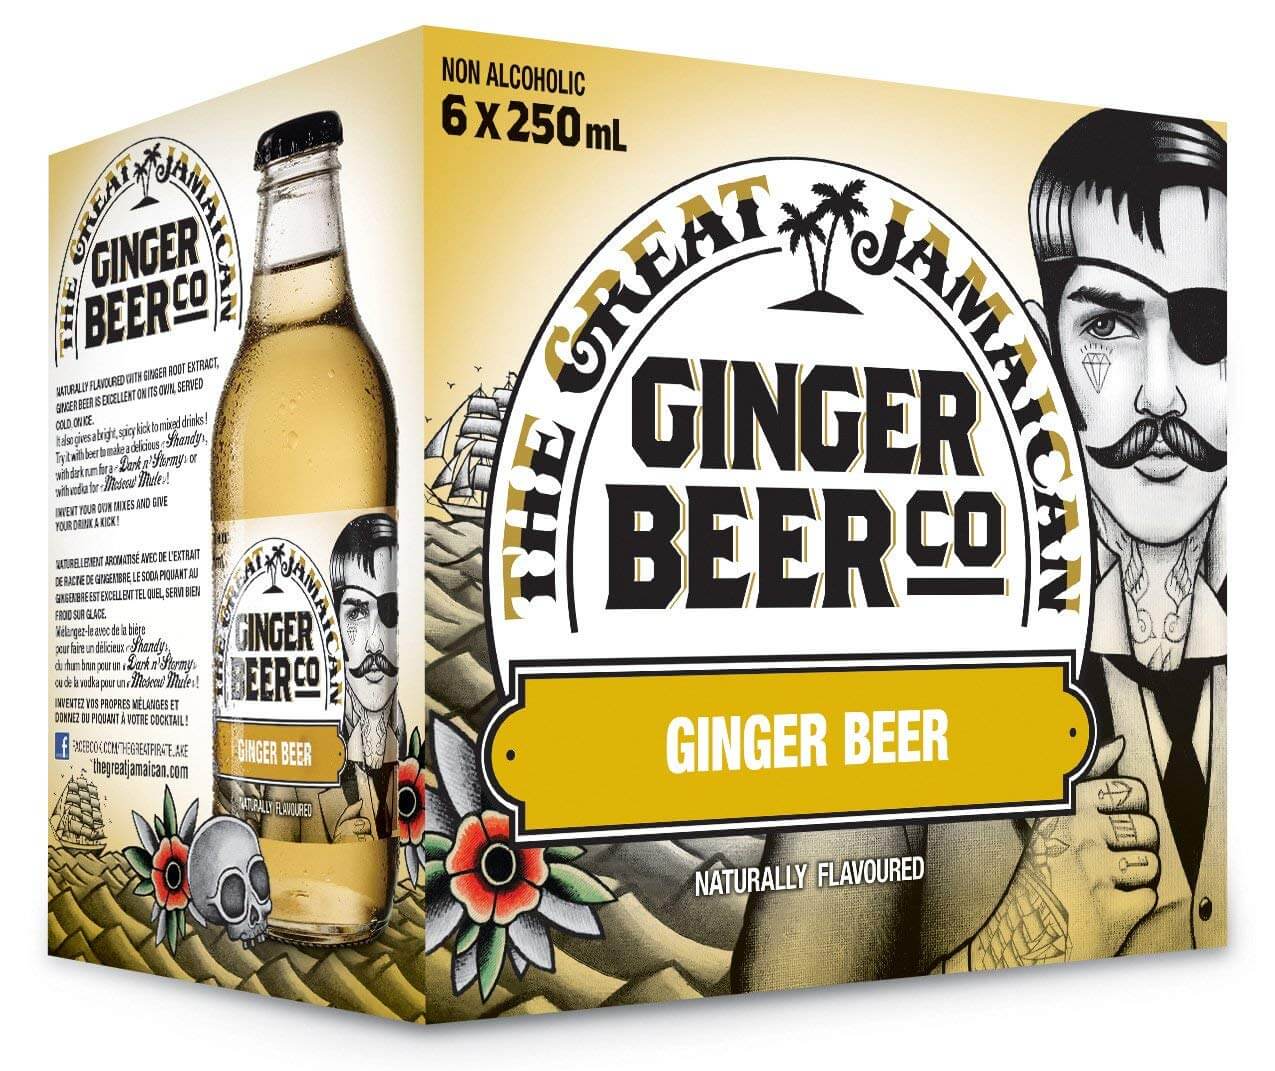 The Great Jamaican Ginger Beer